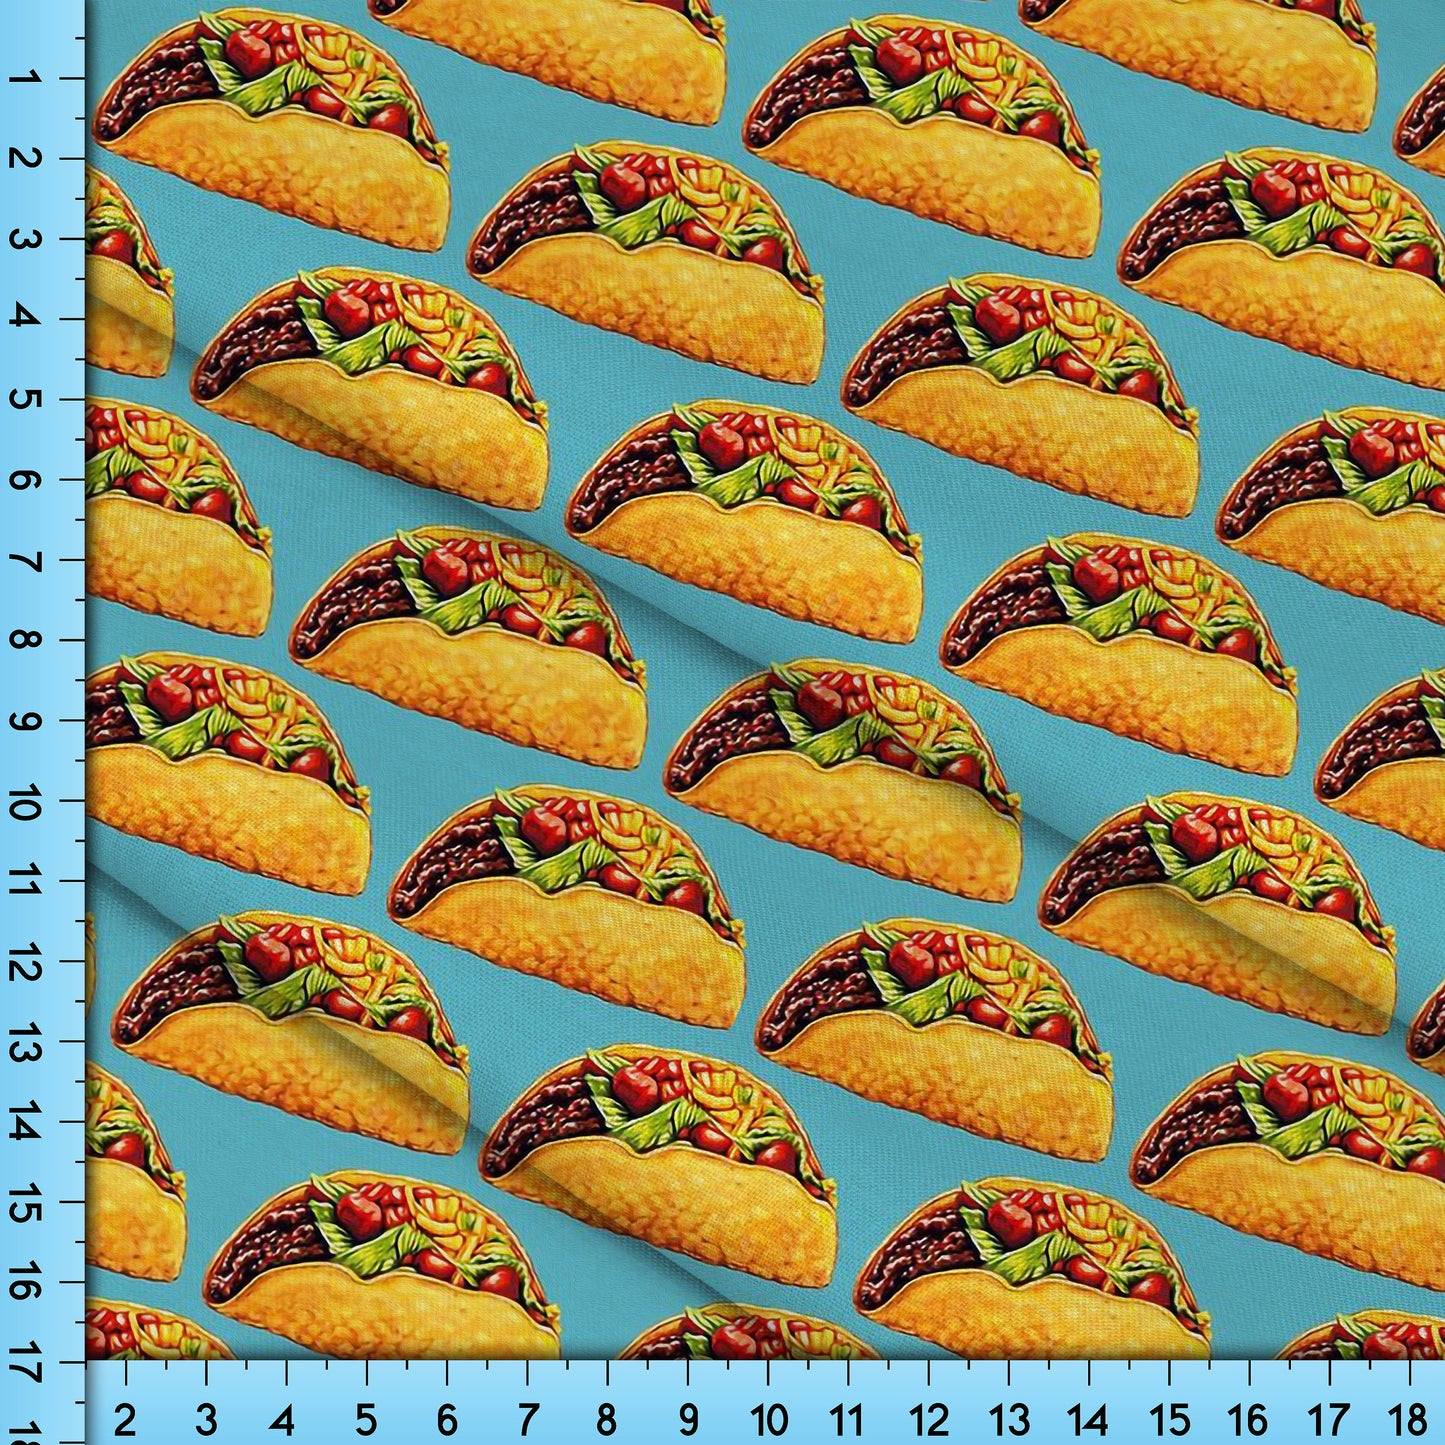 Taco Fabric By the Yard, Taco Party Decor, Fiesta Party Favor Design for Crafts, Masks, Shirts, Upholstery, Home Decor